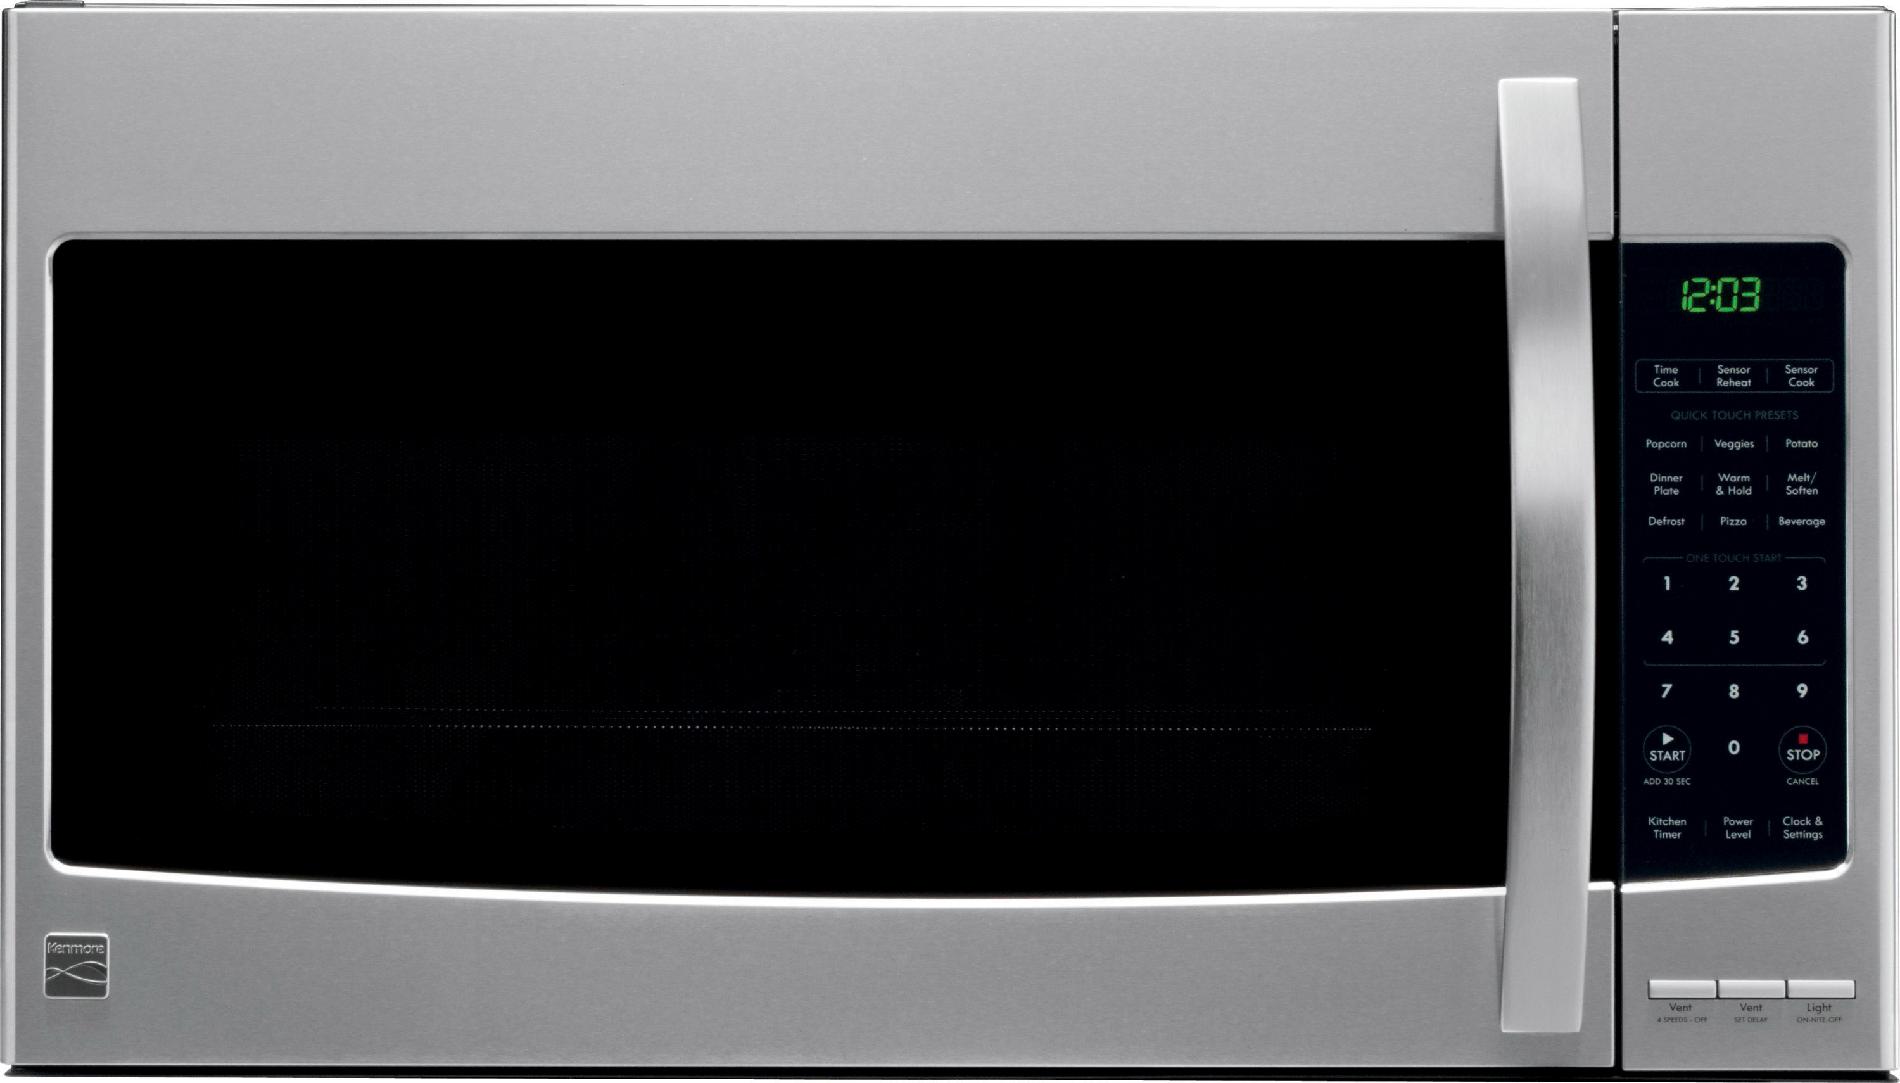 Kenmore 1.7 cu ft. Over-the-Range Microwave: Convenience at Sears